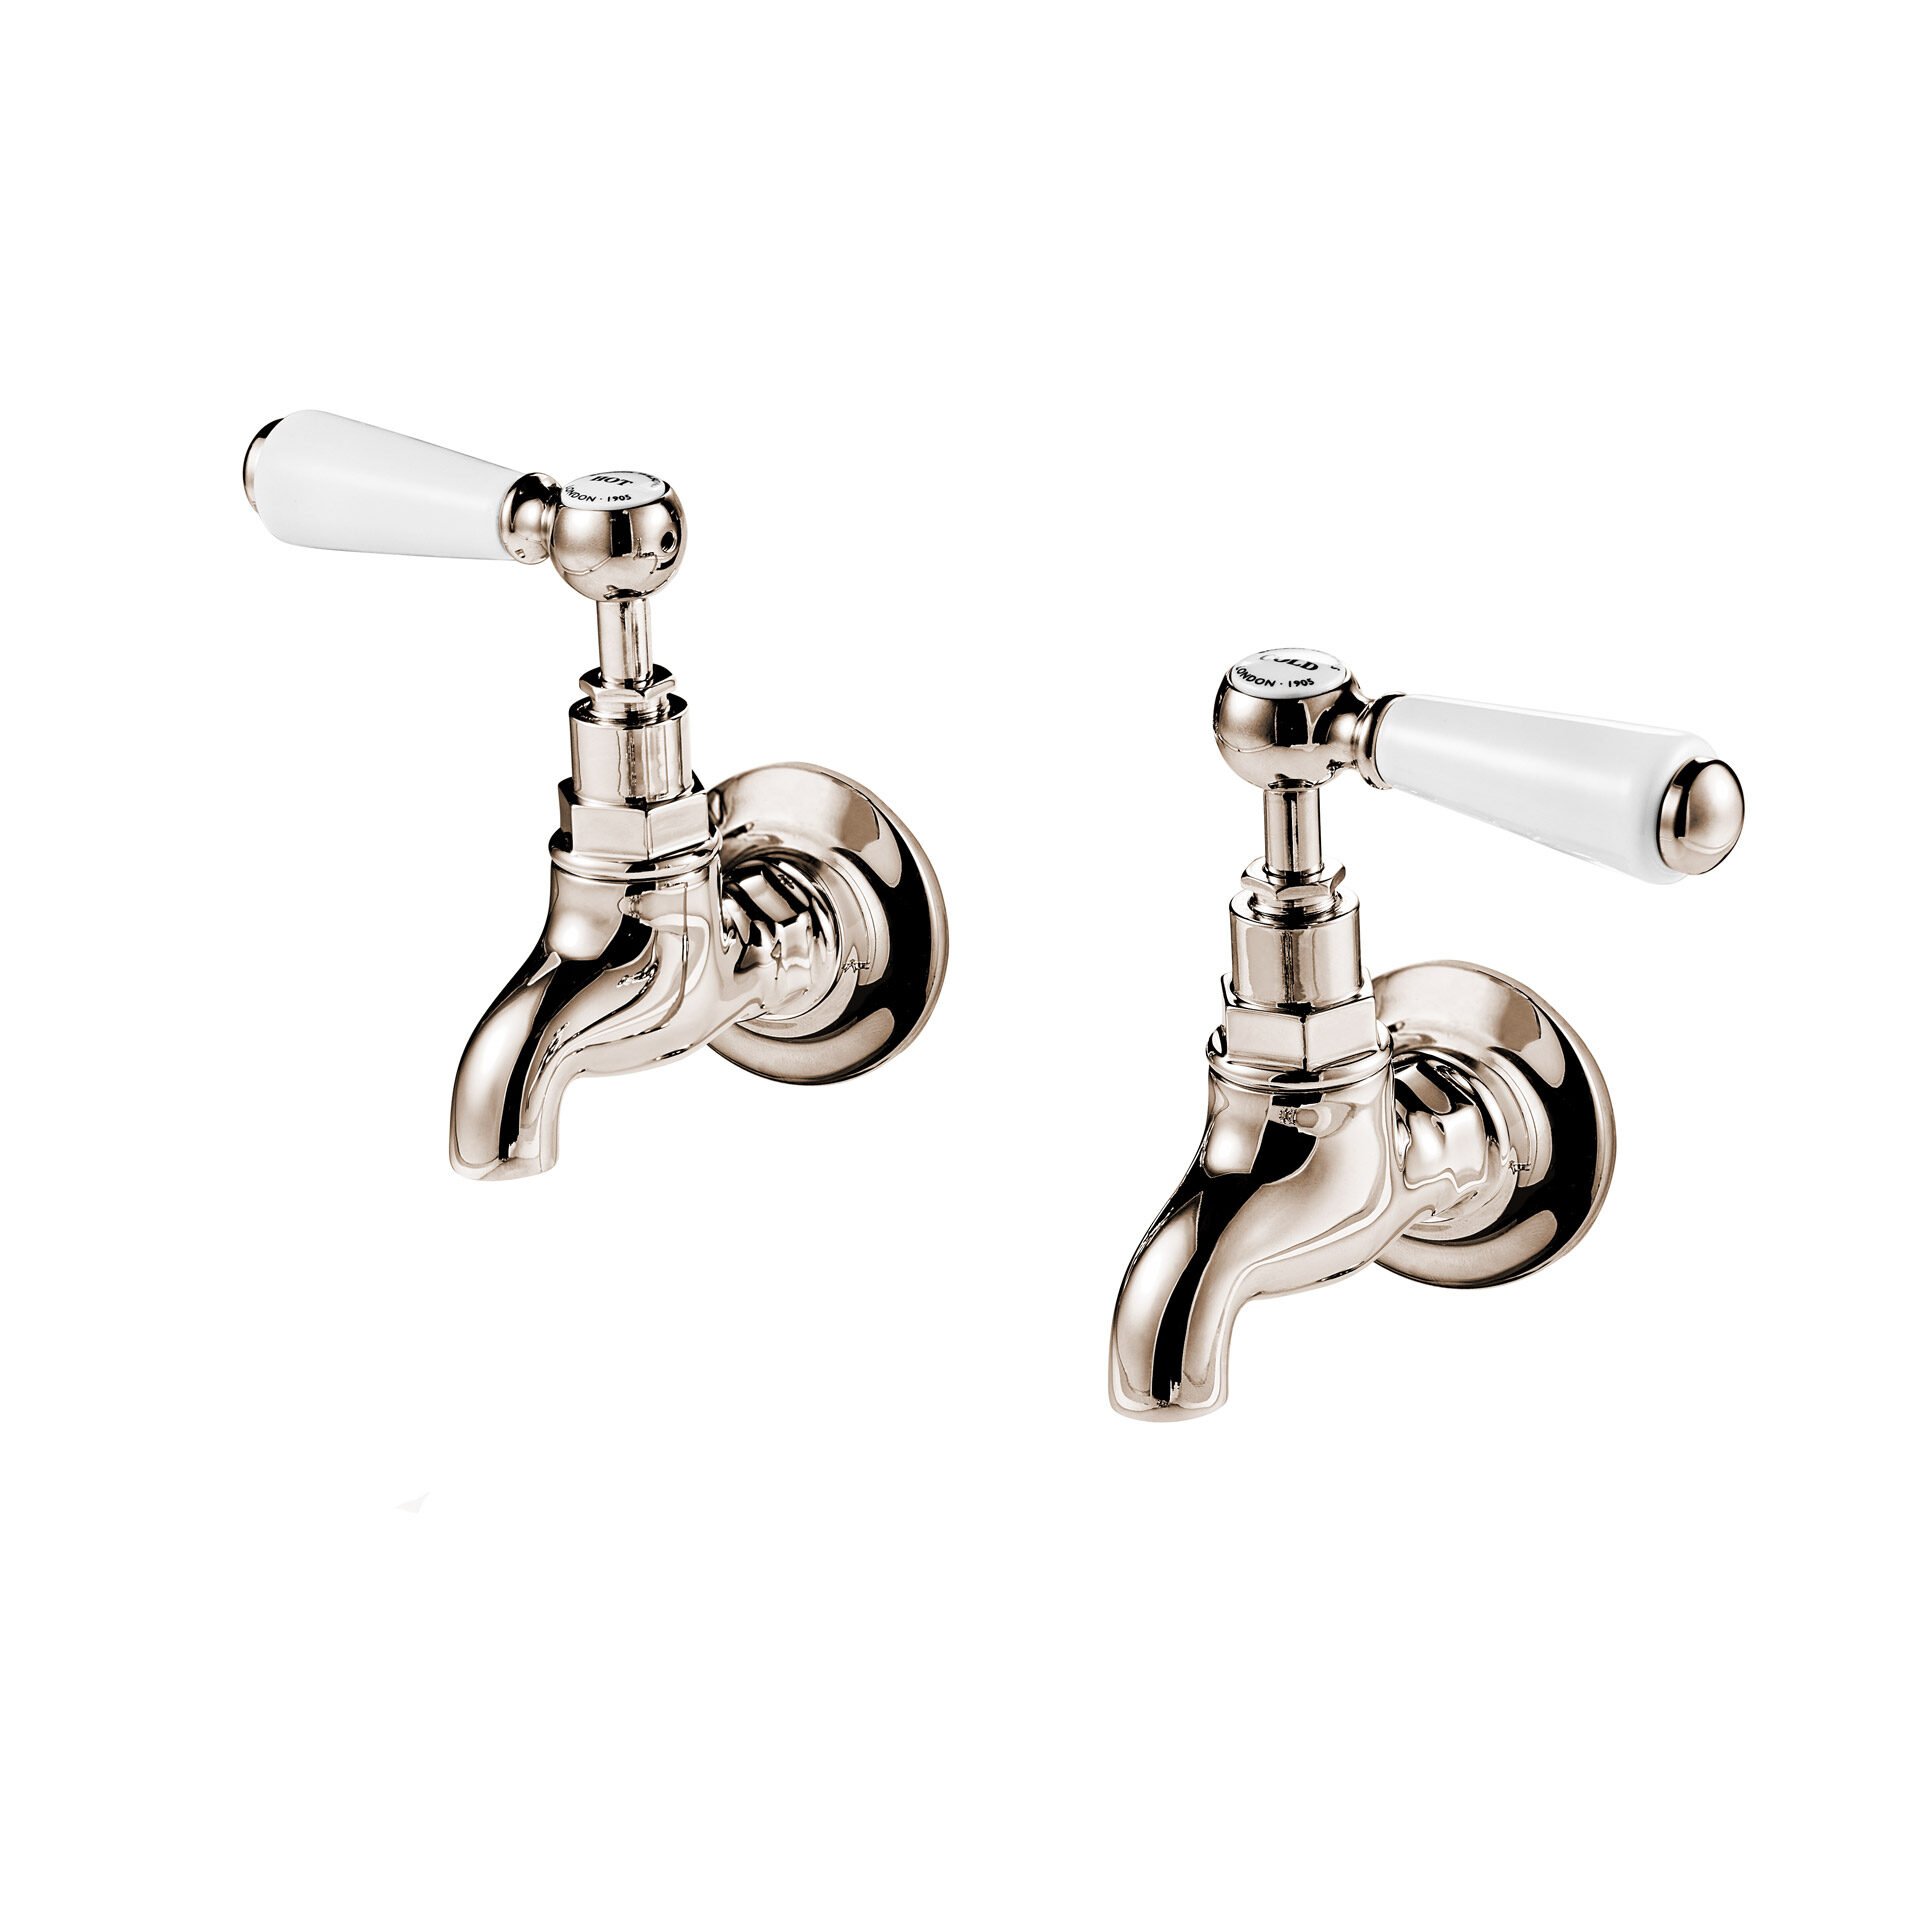 1890’s style wall mounted bib taps with ceramic lever handle British made